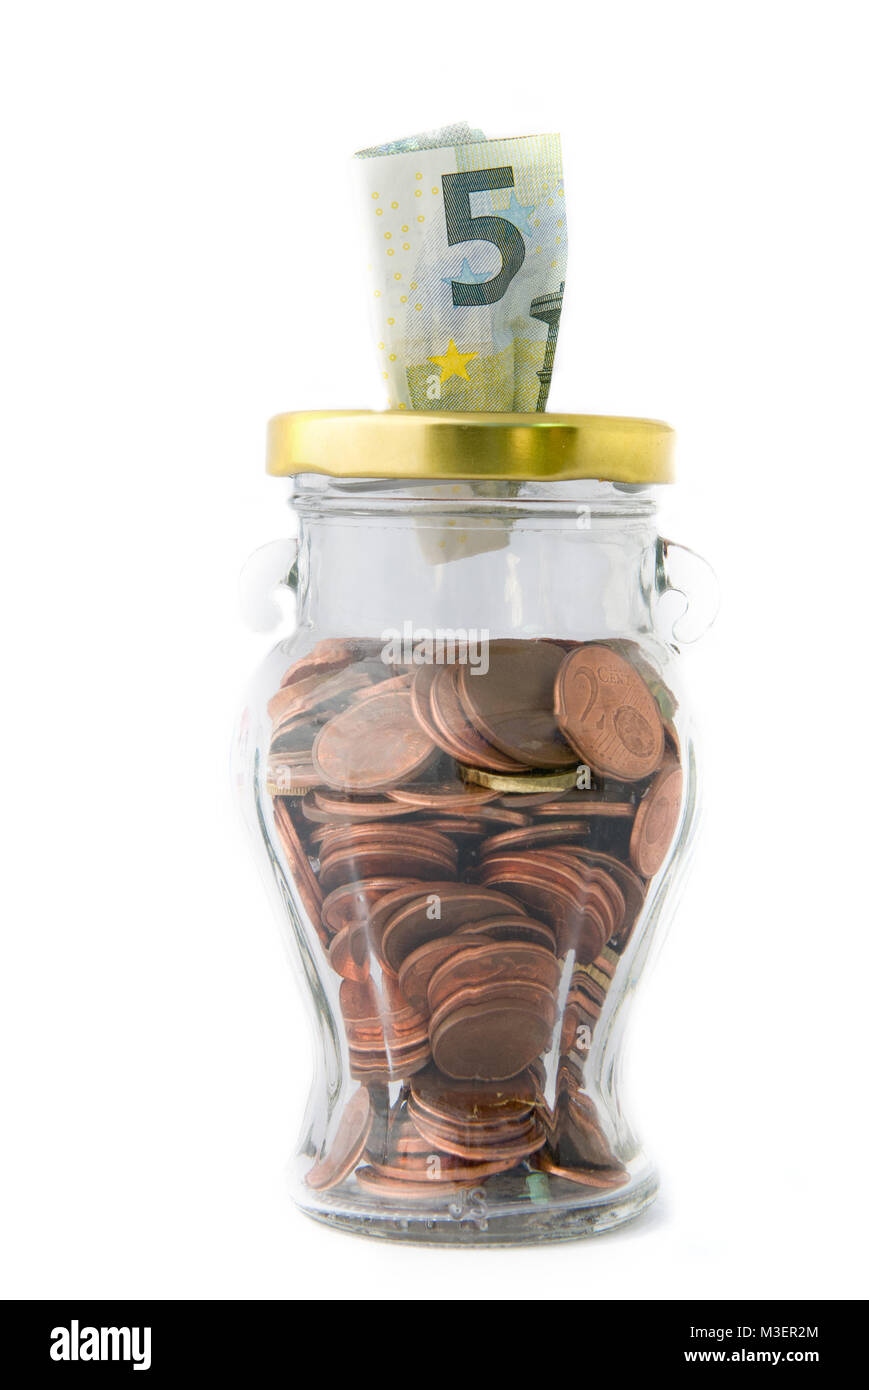 Euro money, including coins and notes on a jar. Concept of home savings Stock Photo